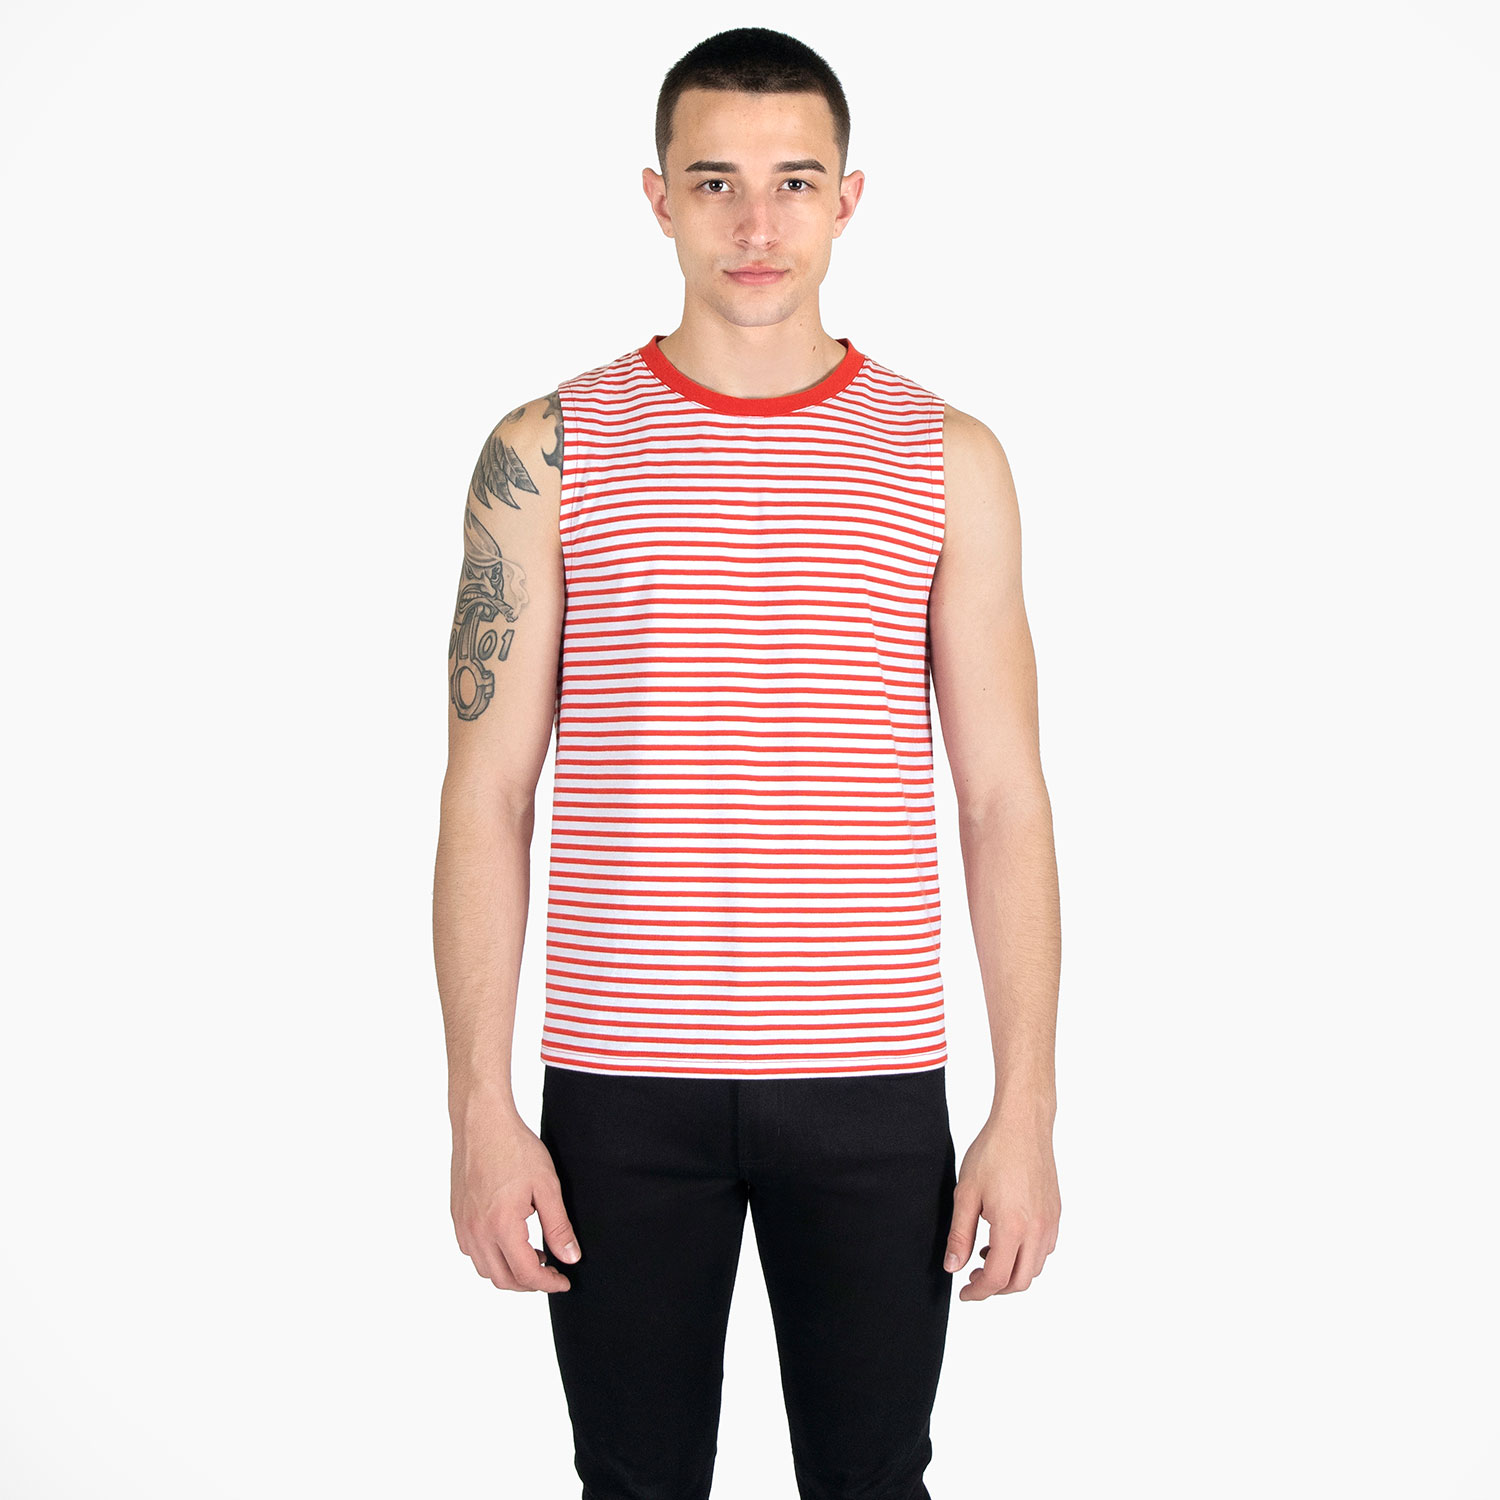 Diego - Red and White Striped Tank Top (Size XS, S, M, L, XL, 2XL, 3XL)